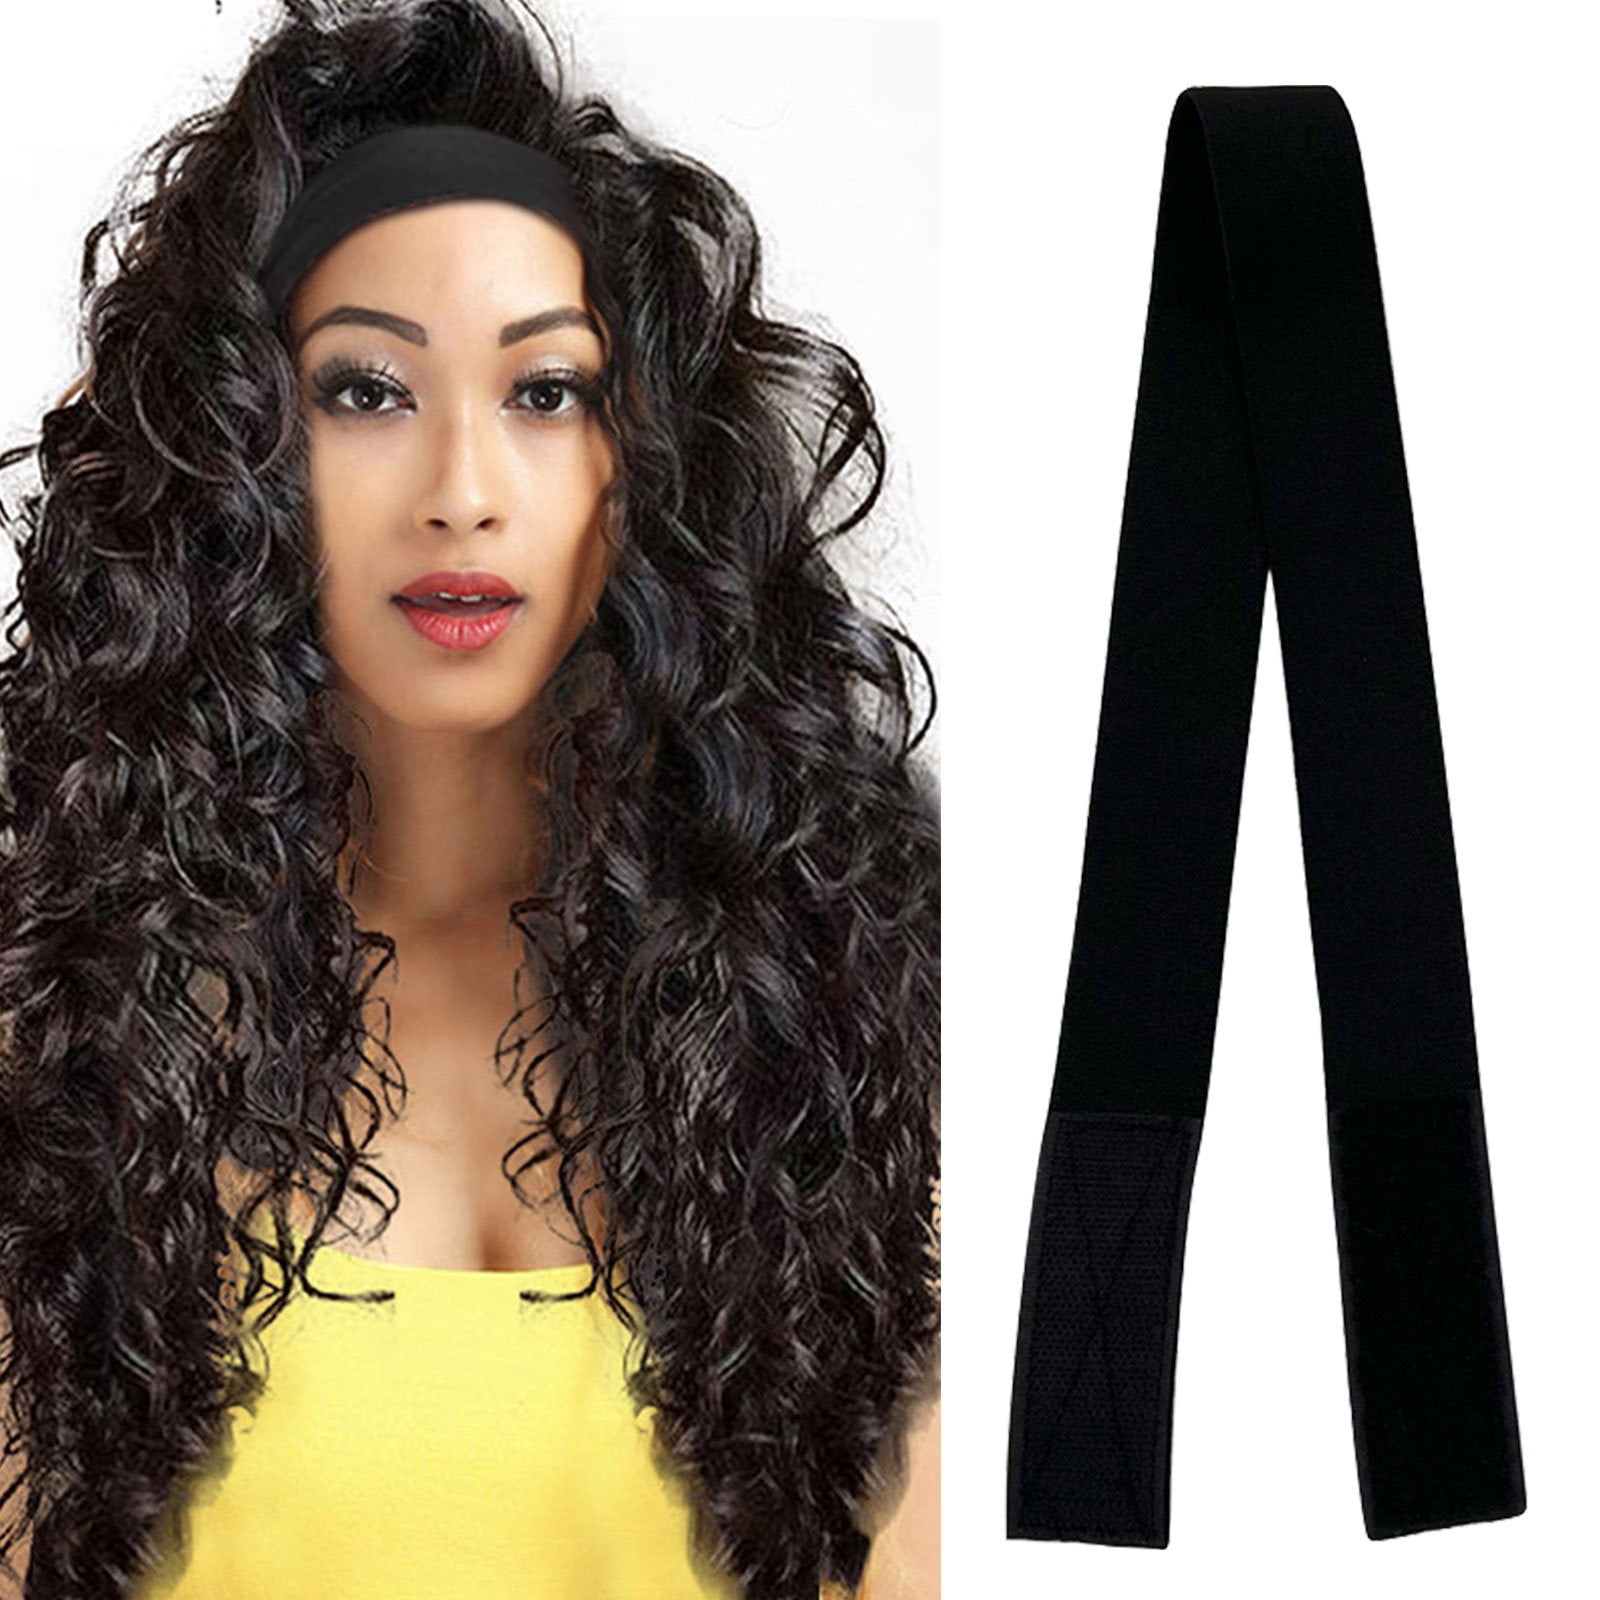 Elastic Band For Lace Frontal Melt,Lace Melting Band For Lace Wigs, Wig  Elastic Band For Melting Lace, Adjustable Wig Band For Edges, Lace Band Wig  Bands 